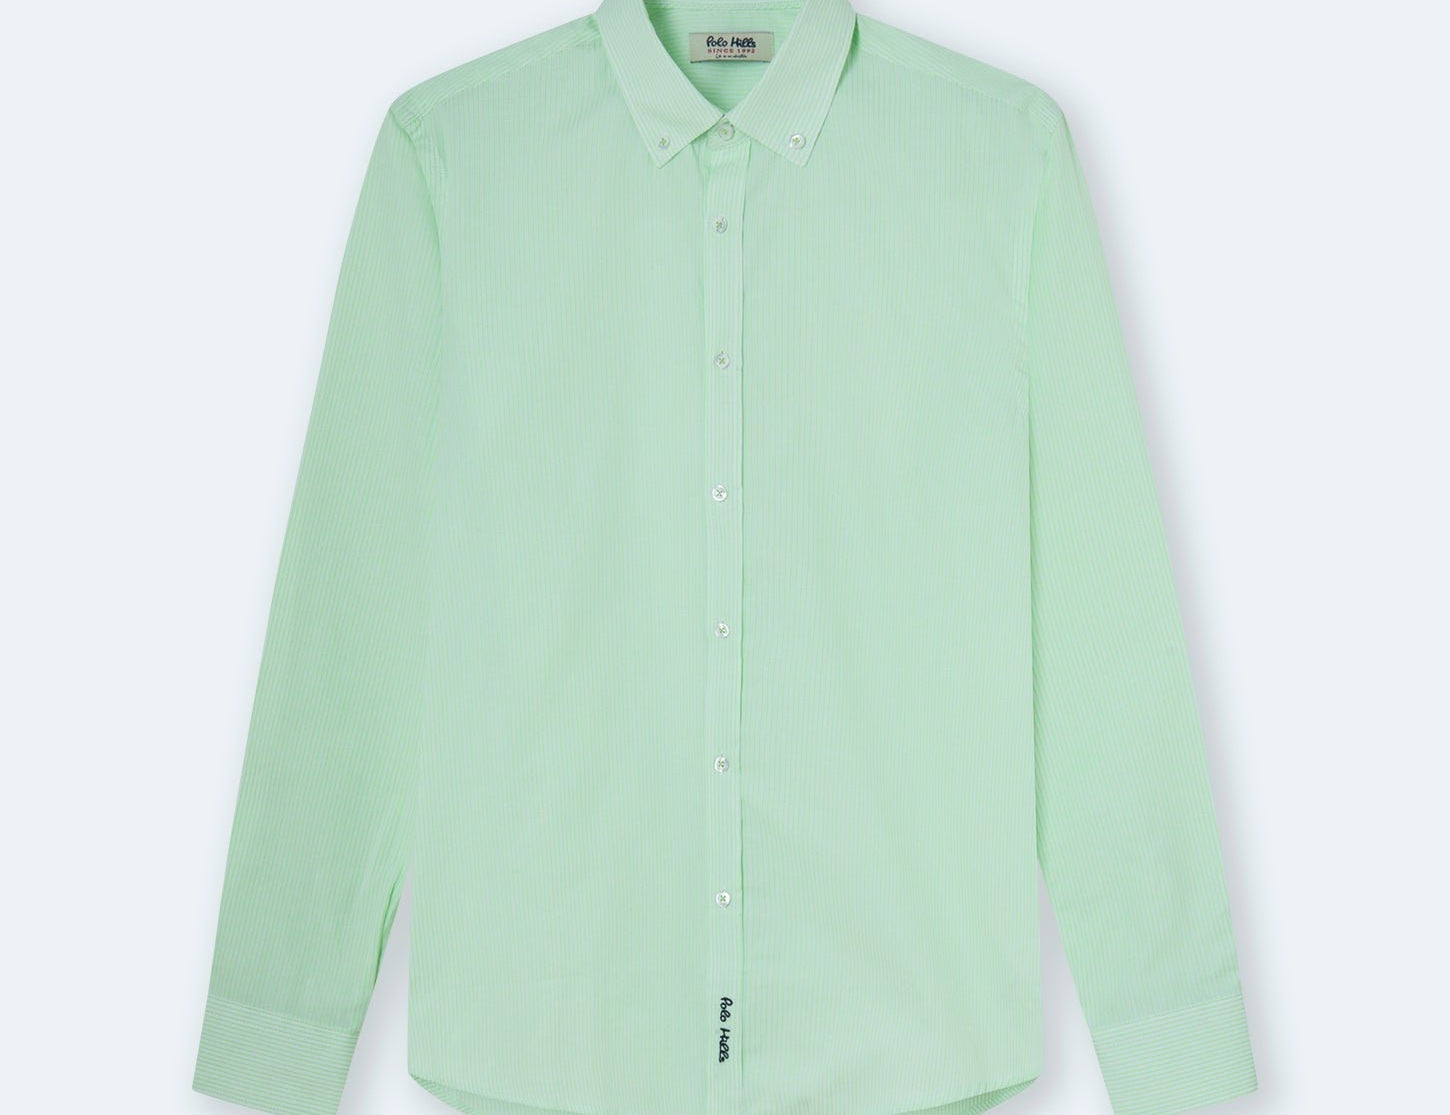 CAMISA RISCA GREEN - Polo Hills